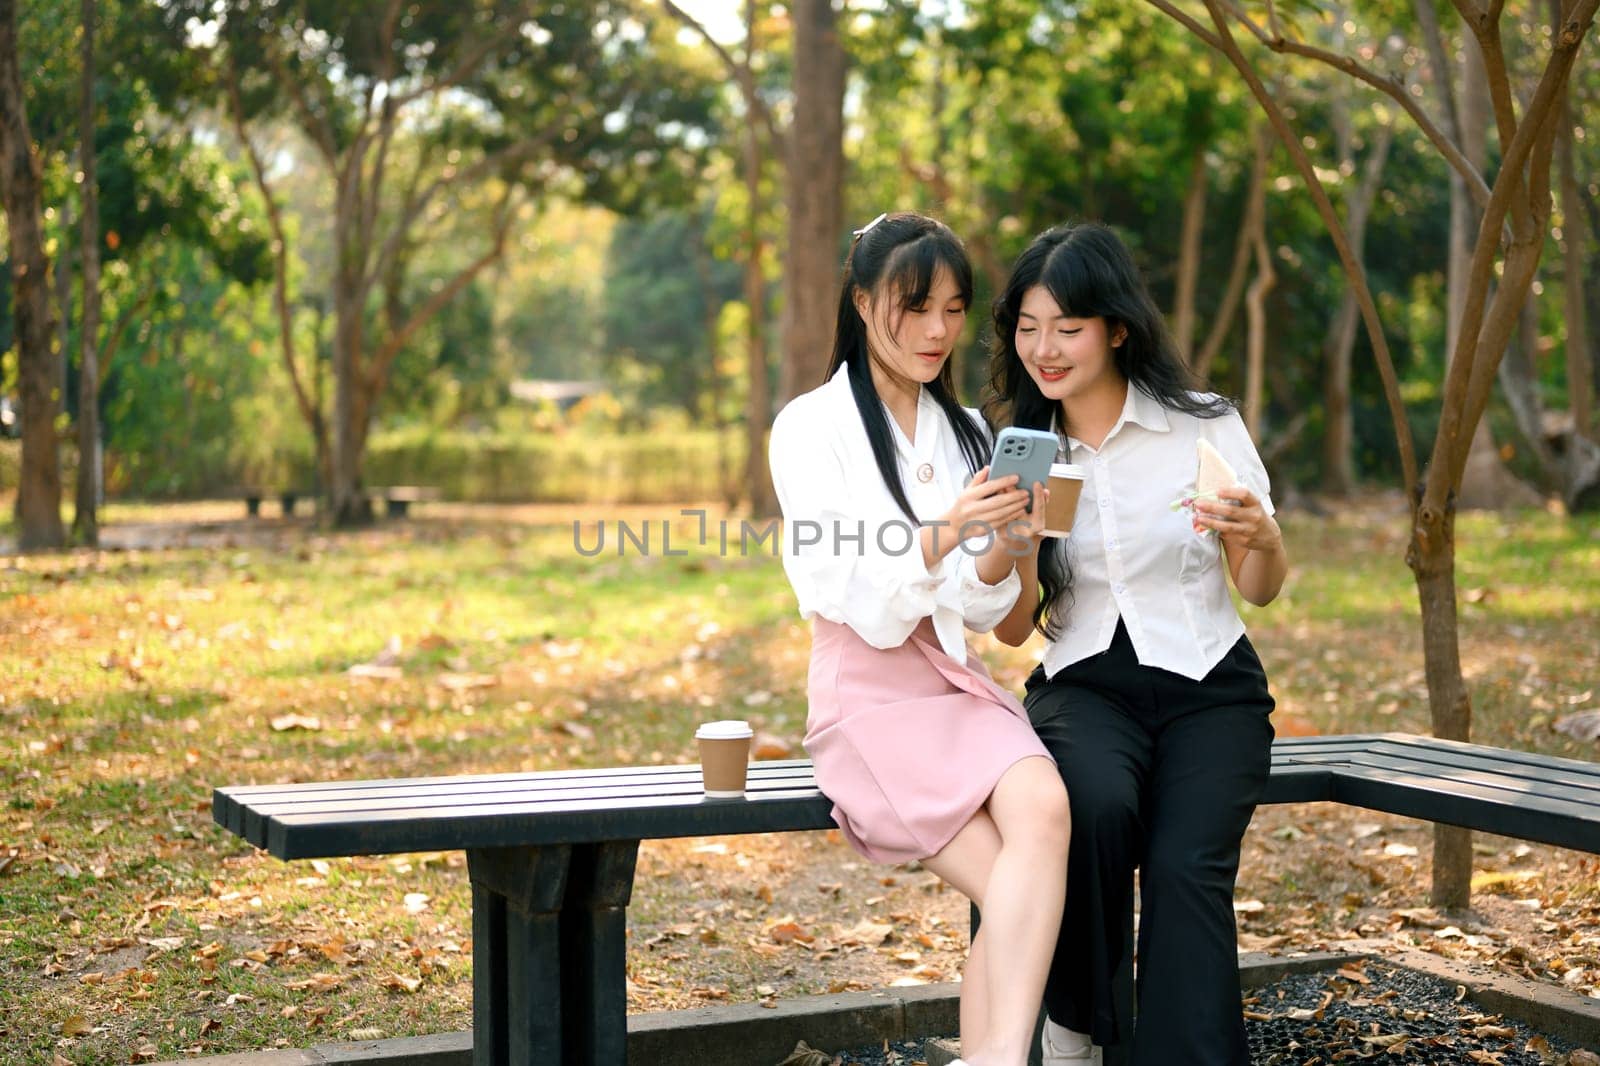 Happy smiling female friends sitting in park bench and looking at mobile phone.